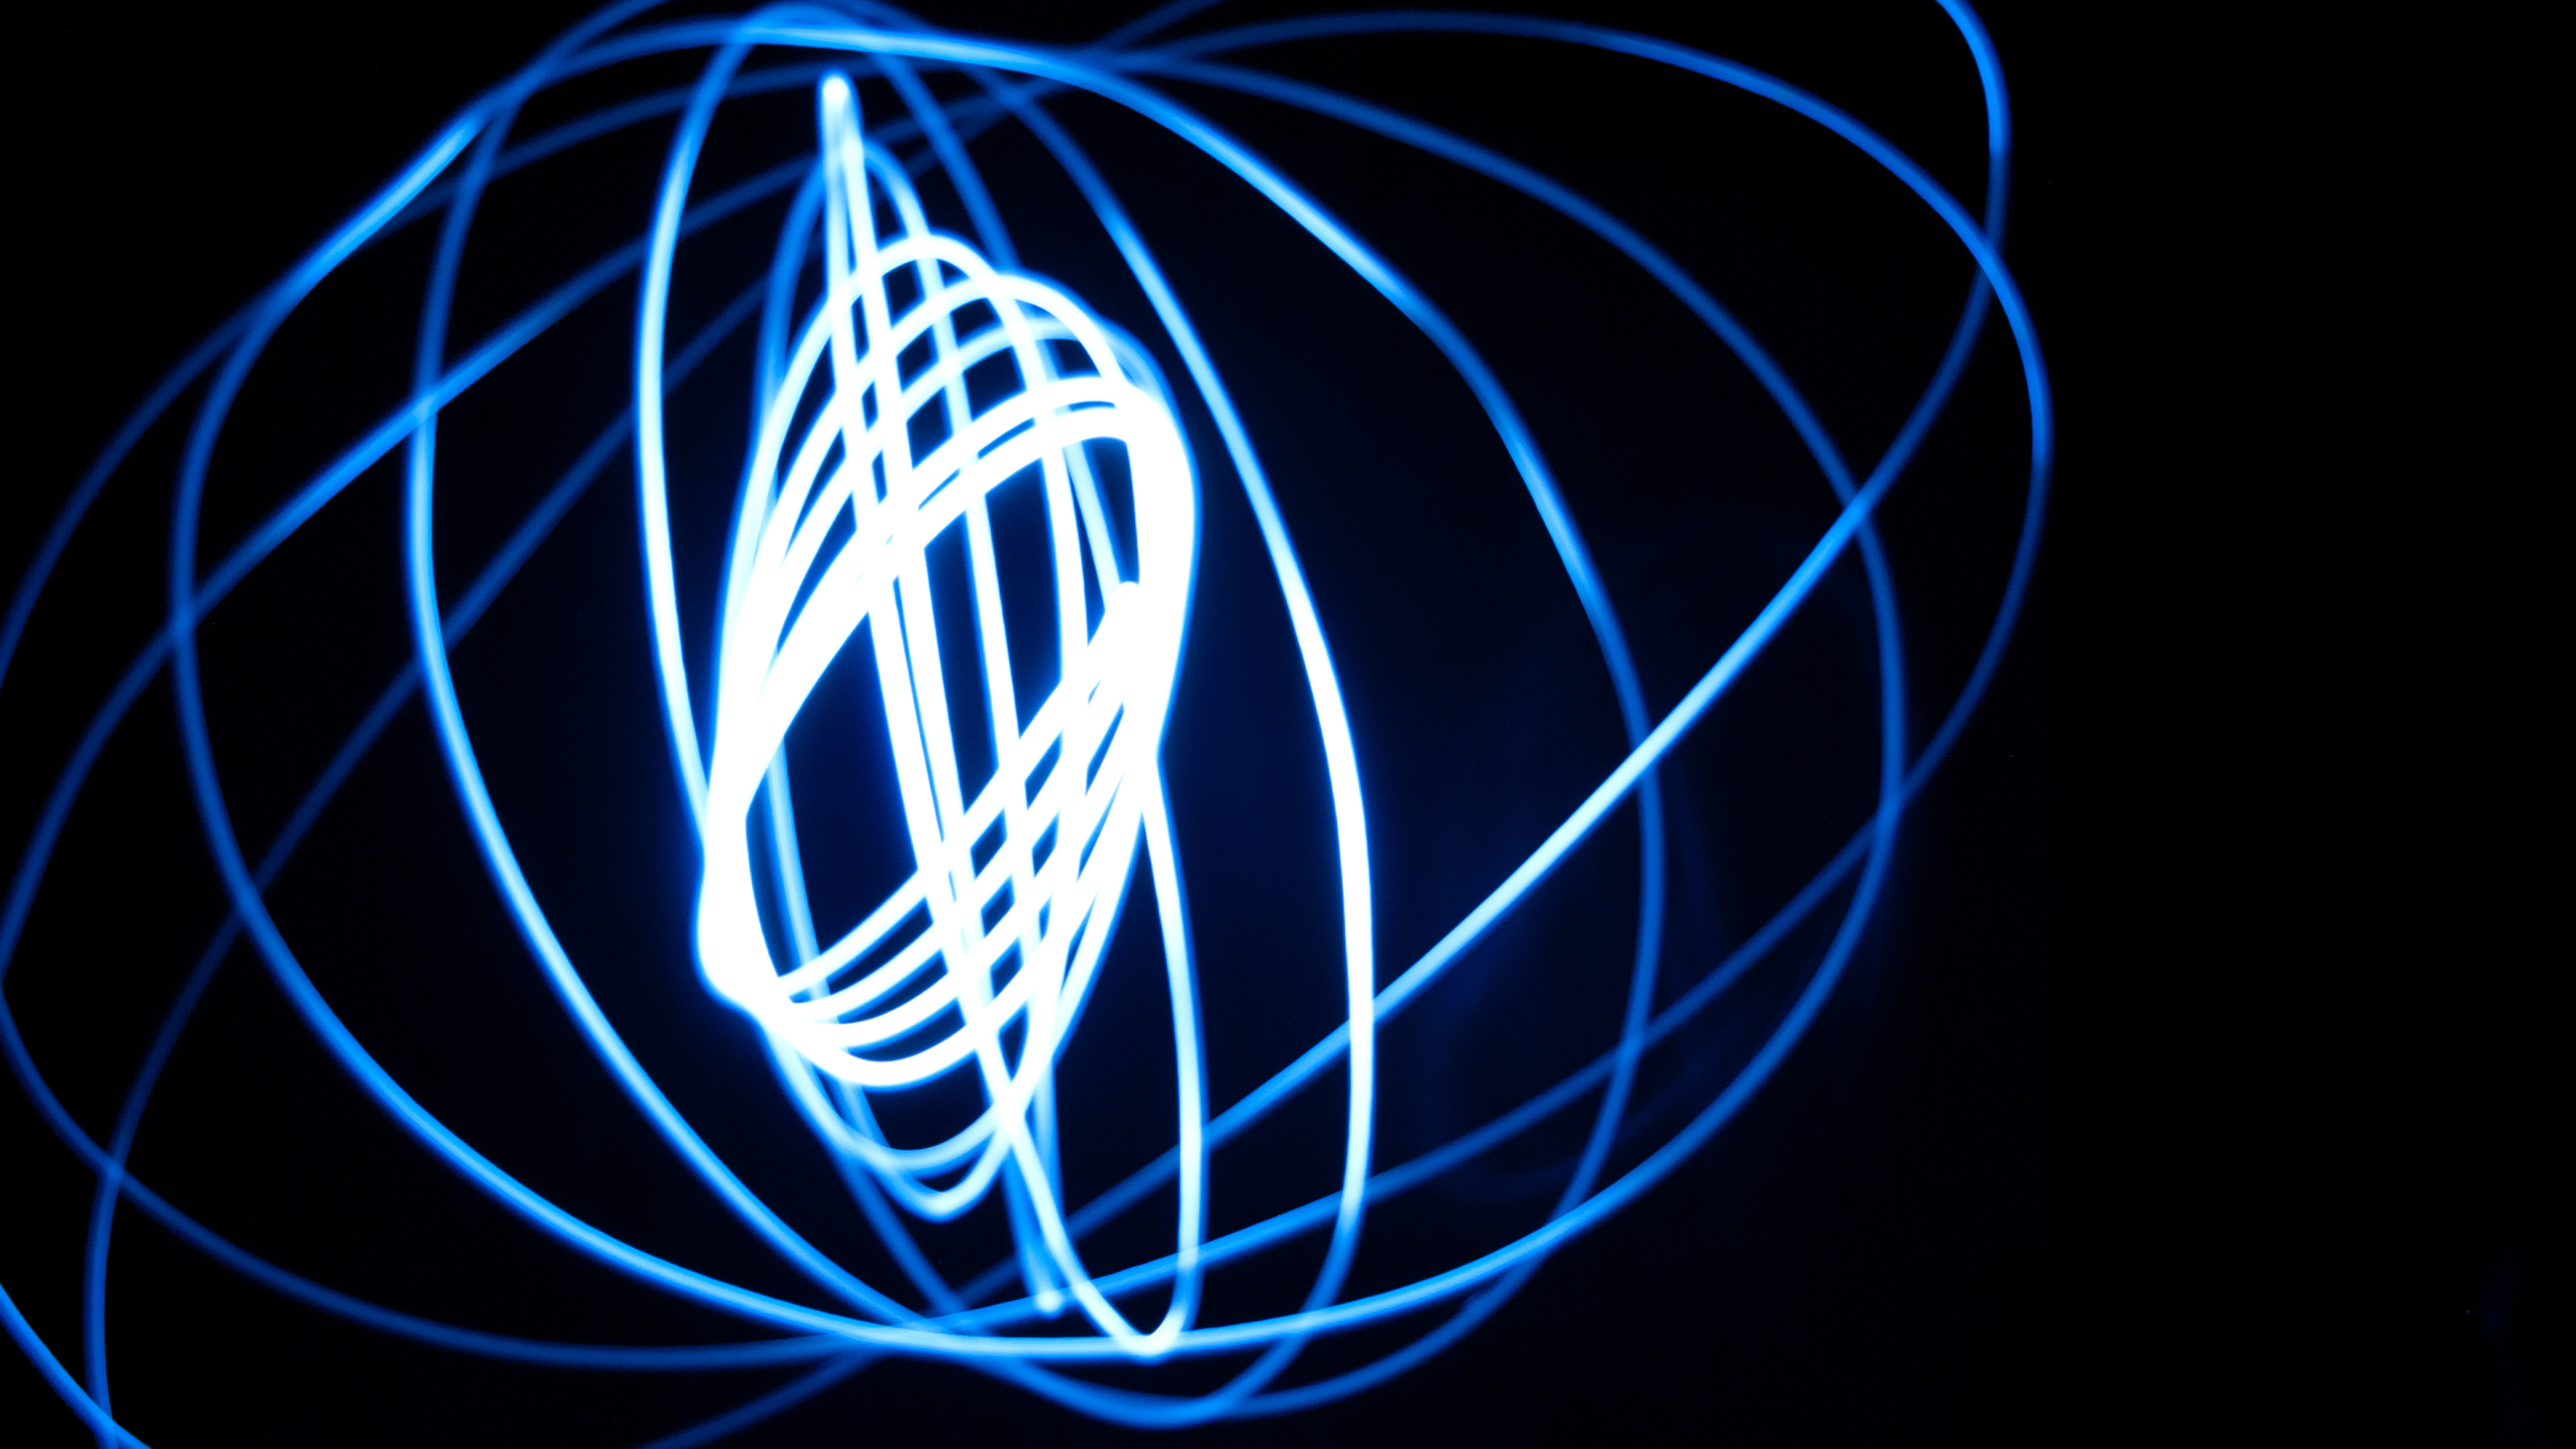 Long Exposure Light Graffiti Simple Background Abstract Black Background 3840x2160